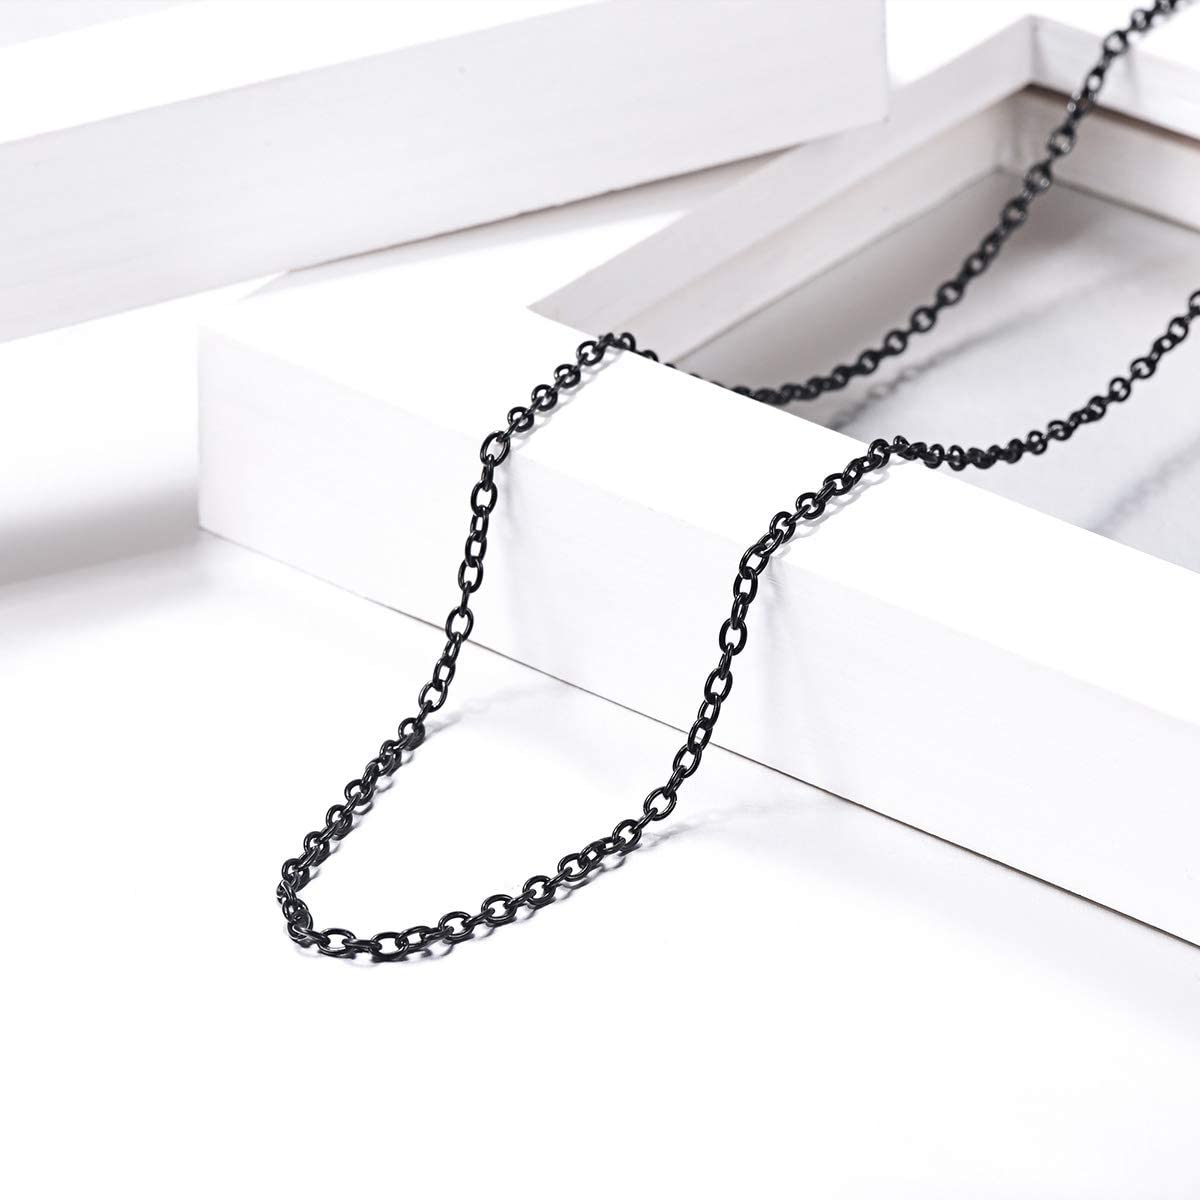 FOCALOOK 2MM Rolo Chain Necklace for Men Jewelry, 316L Stainless Steel/18K Gold Plated/Black Chain Necklace,18''/20''/22''/24''/26''/28''/30